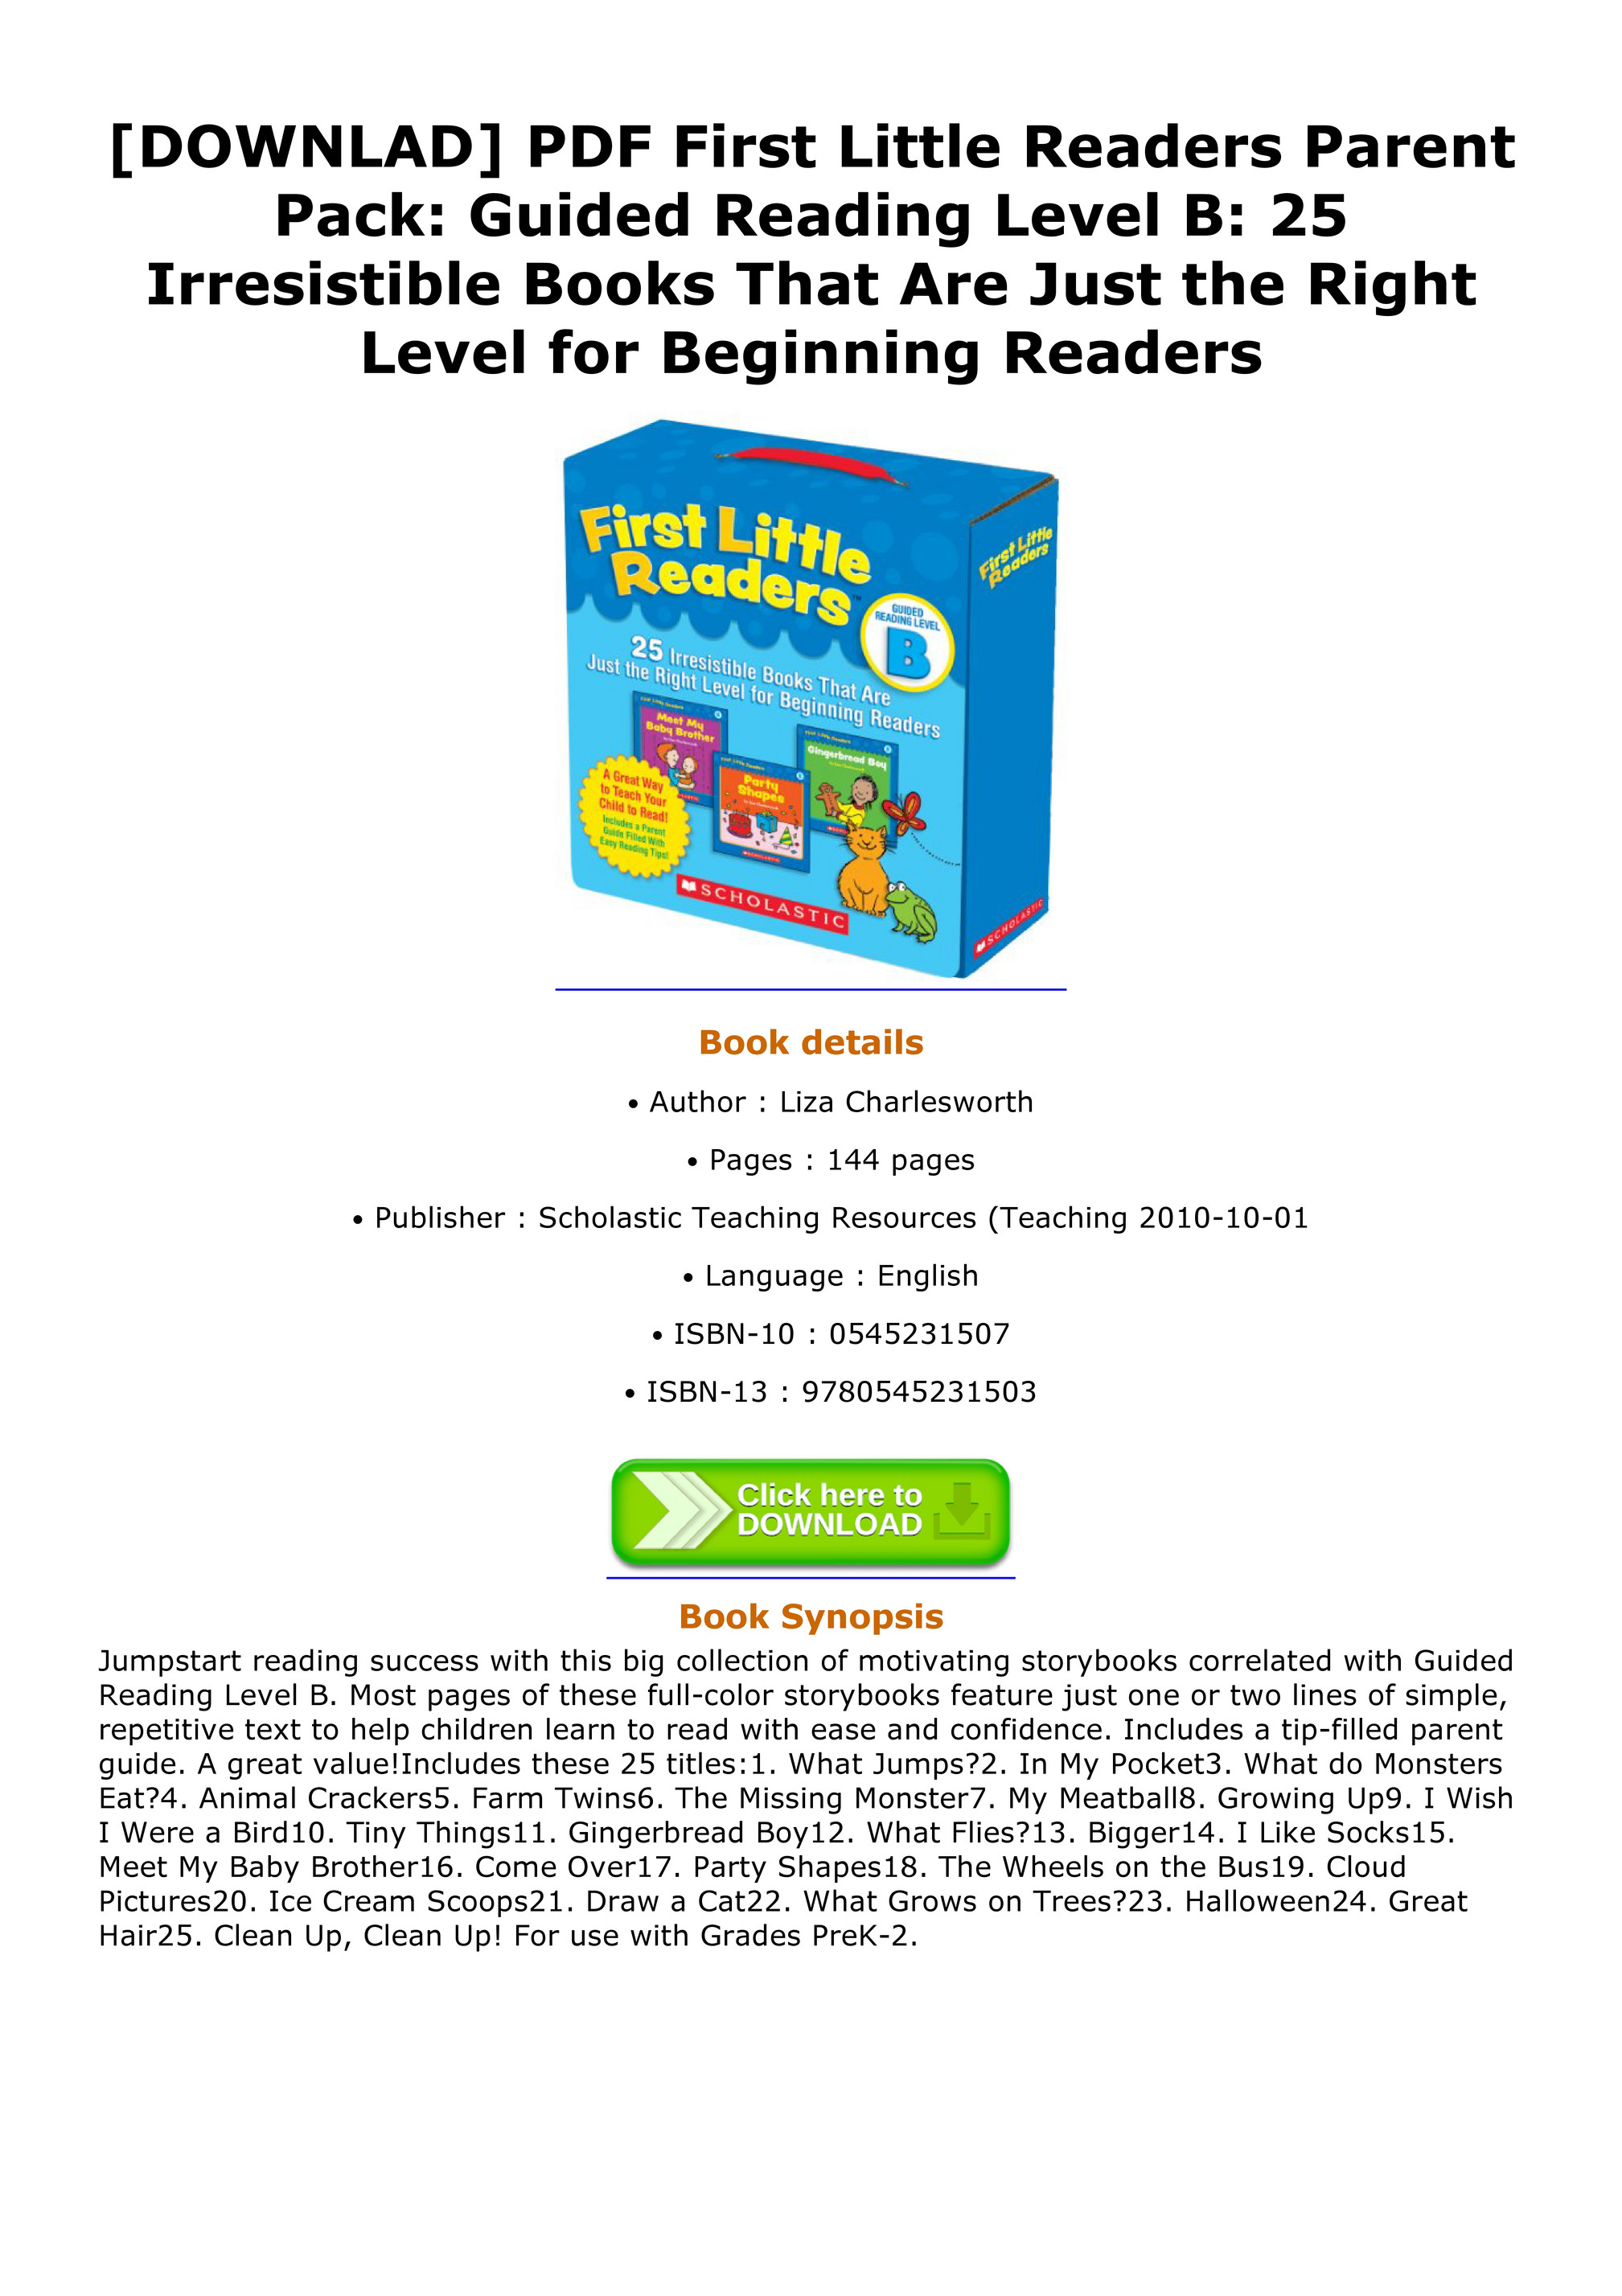 Tyson Downlad Pdf First Little Readers Parent Pack Guided Reading Level B 25 Irresistible Books That Are Just The Right Level For Beginning Readers Page 1 Created With Publitas Com